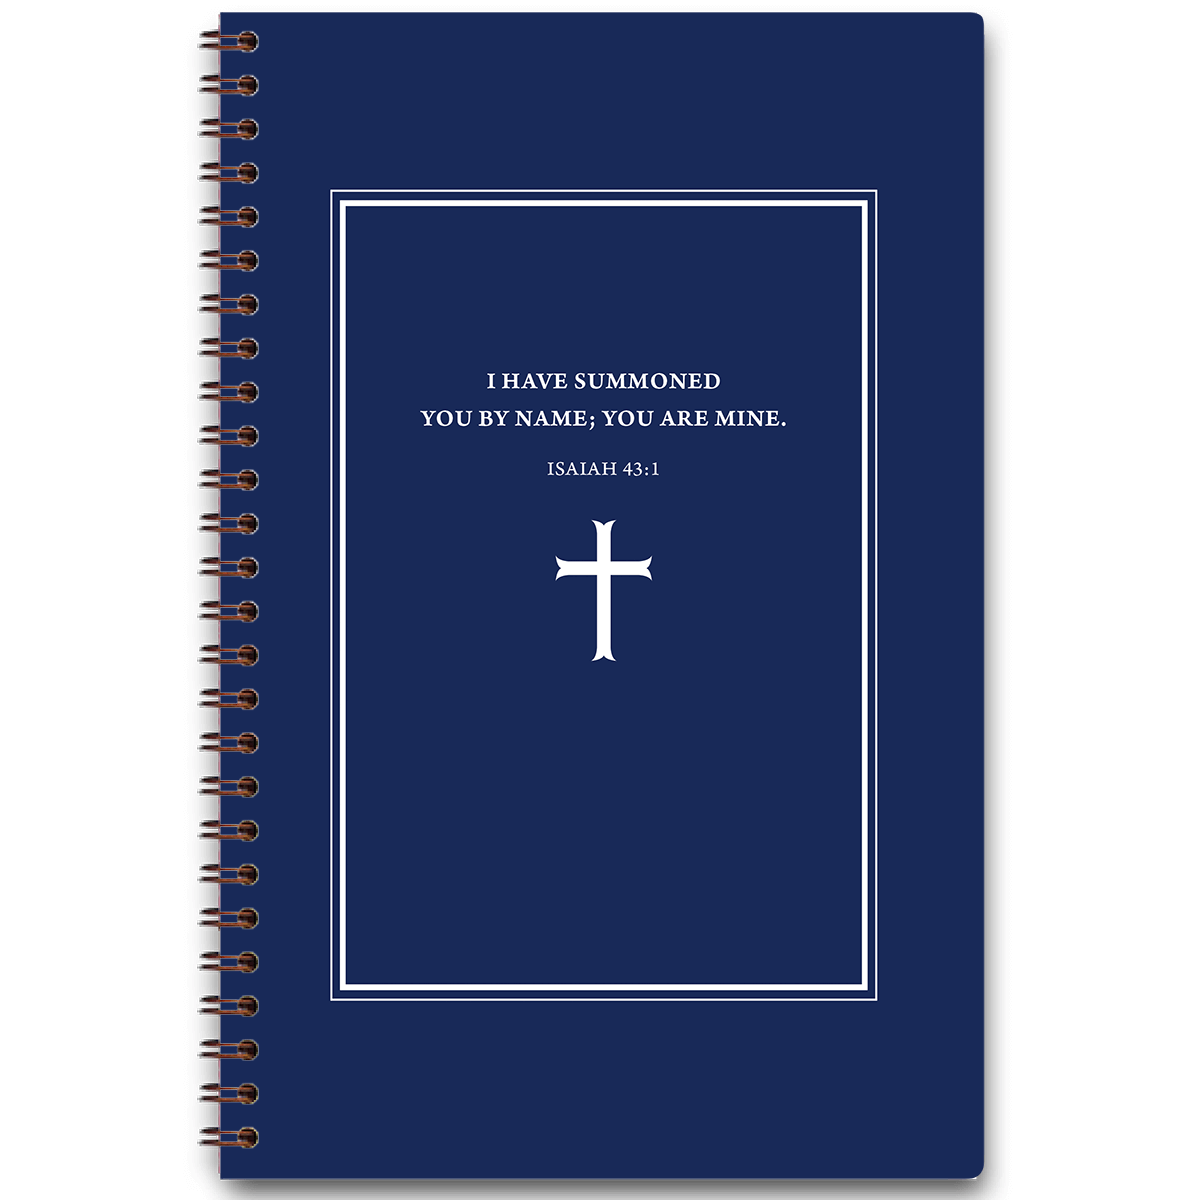 christian gifts, christian gifts for men, christian planner, cross planner, christian gifts for fathers day, christian gifts for graduation, christian wedding gifts, scripture planners, bible planners, best christian planner, christian planner 2022, christian journal planner, planners for men, bible planners 2022